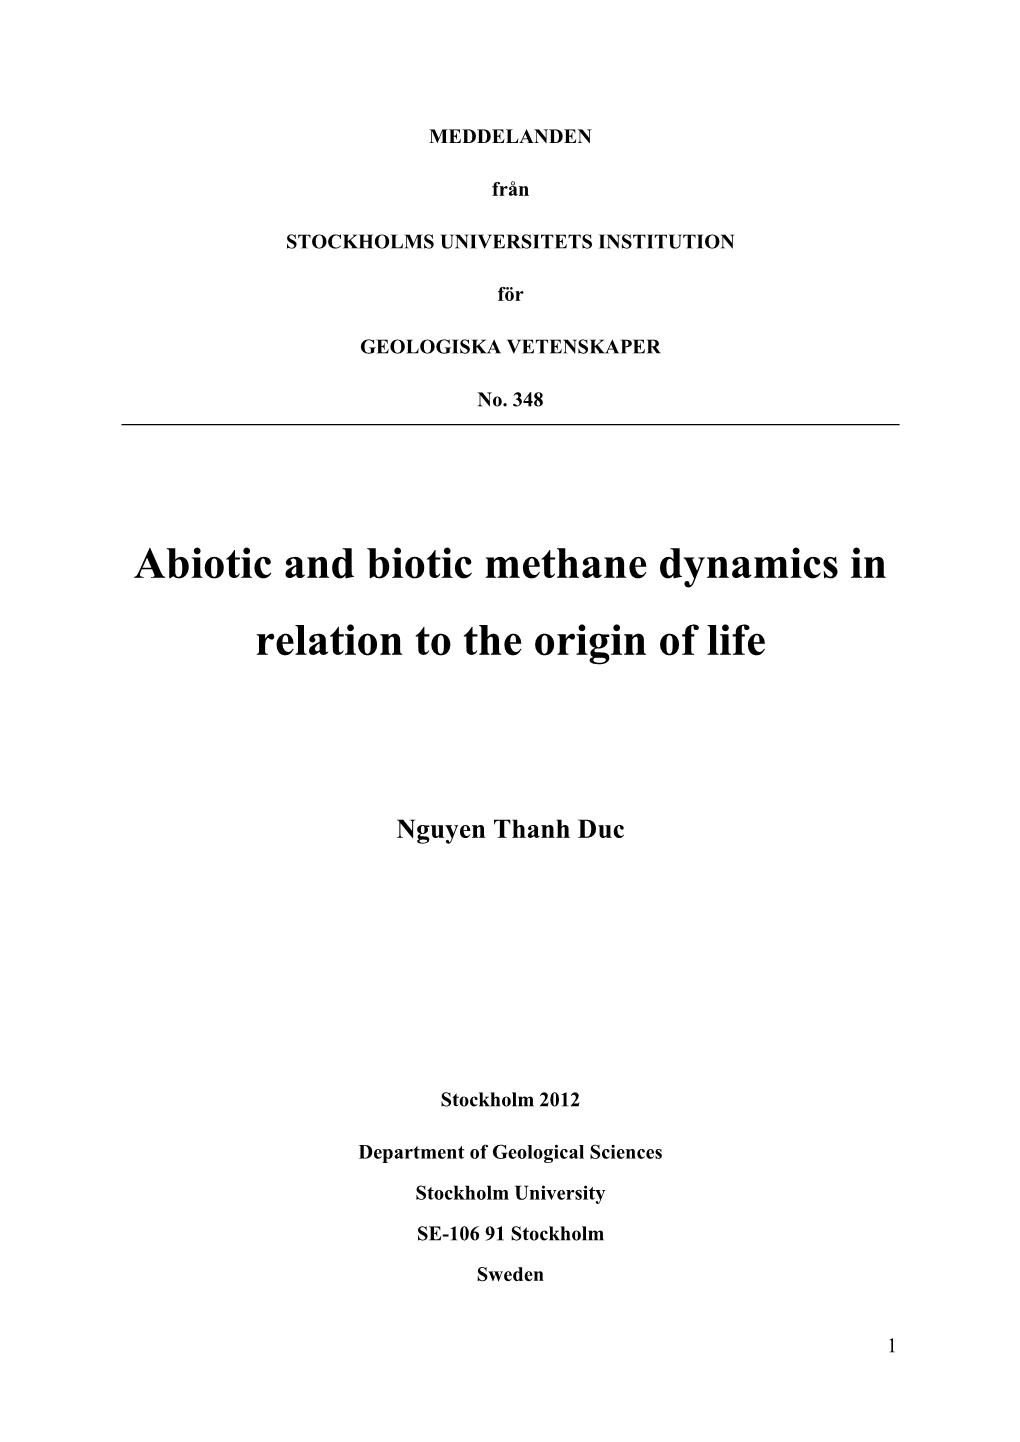 Abiotic and Biotic Methane Dynamics in Relation to the Origin of Life